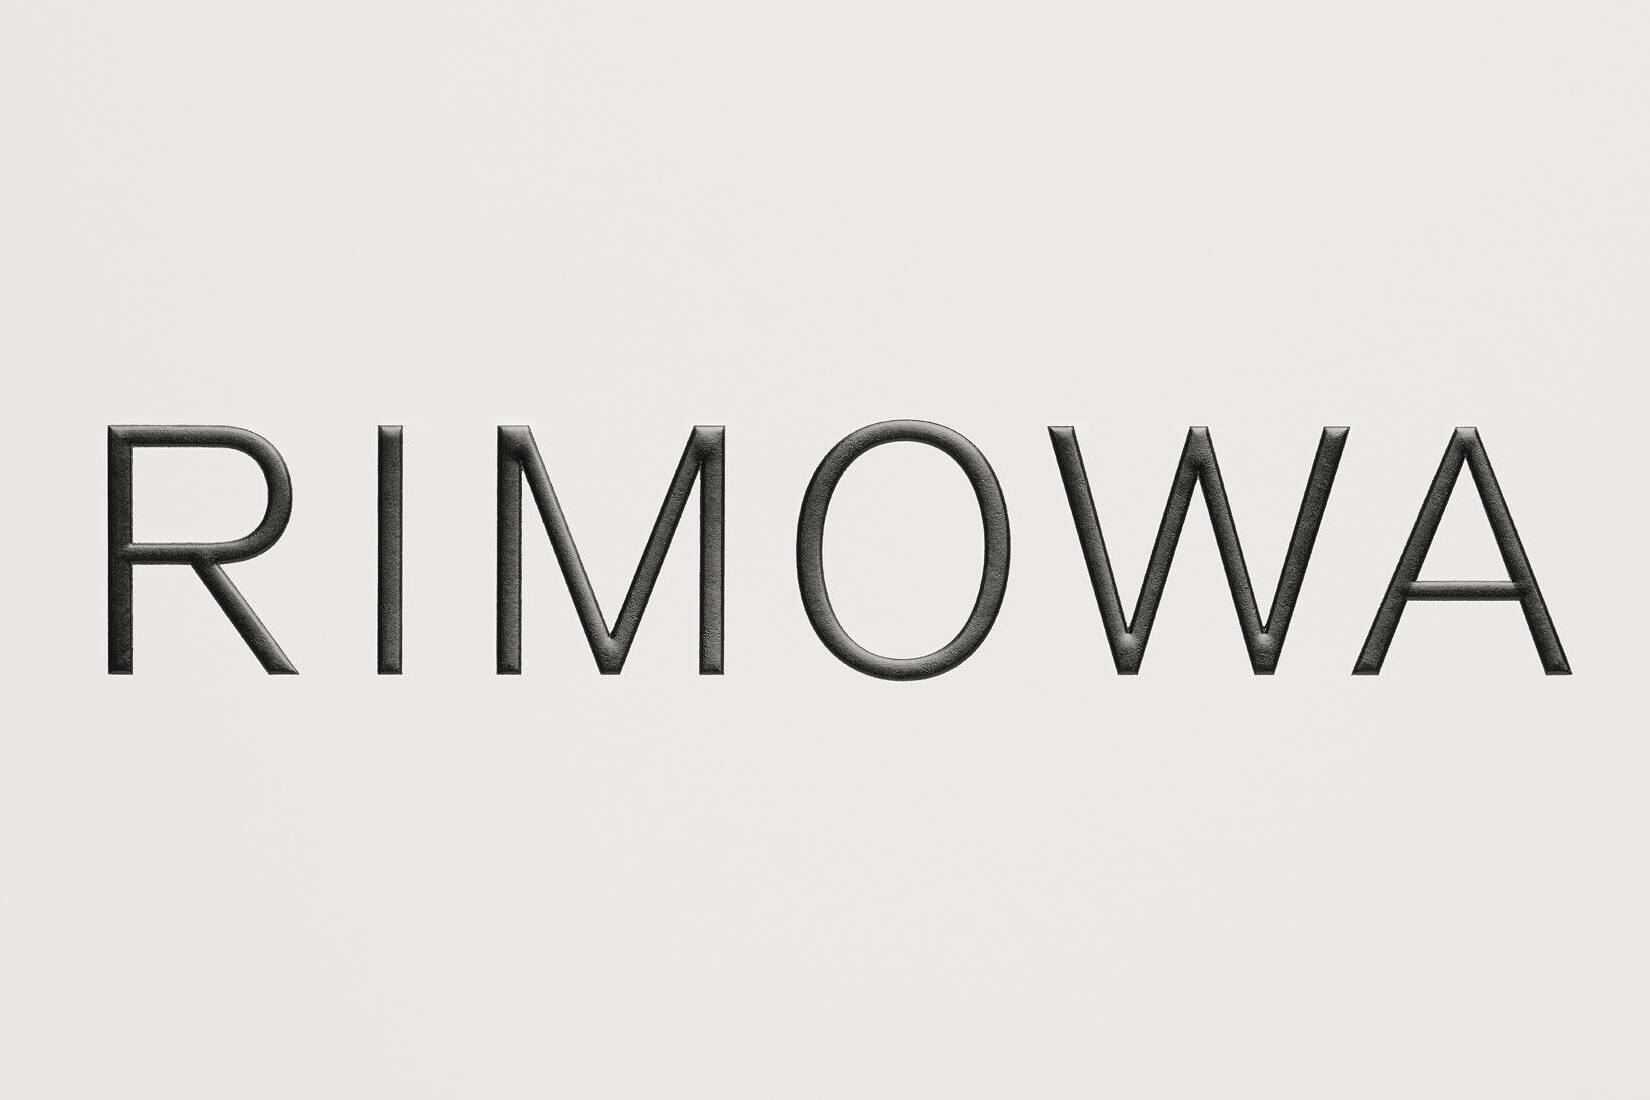 The word rimowa is written on a white background.